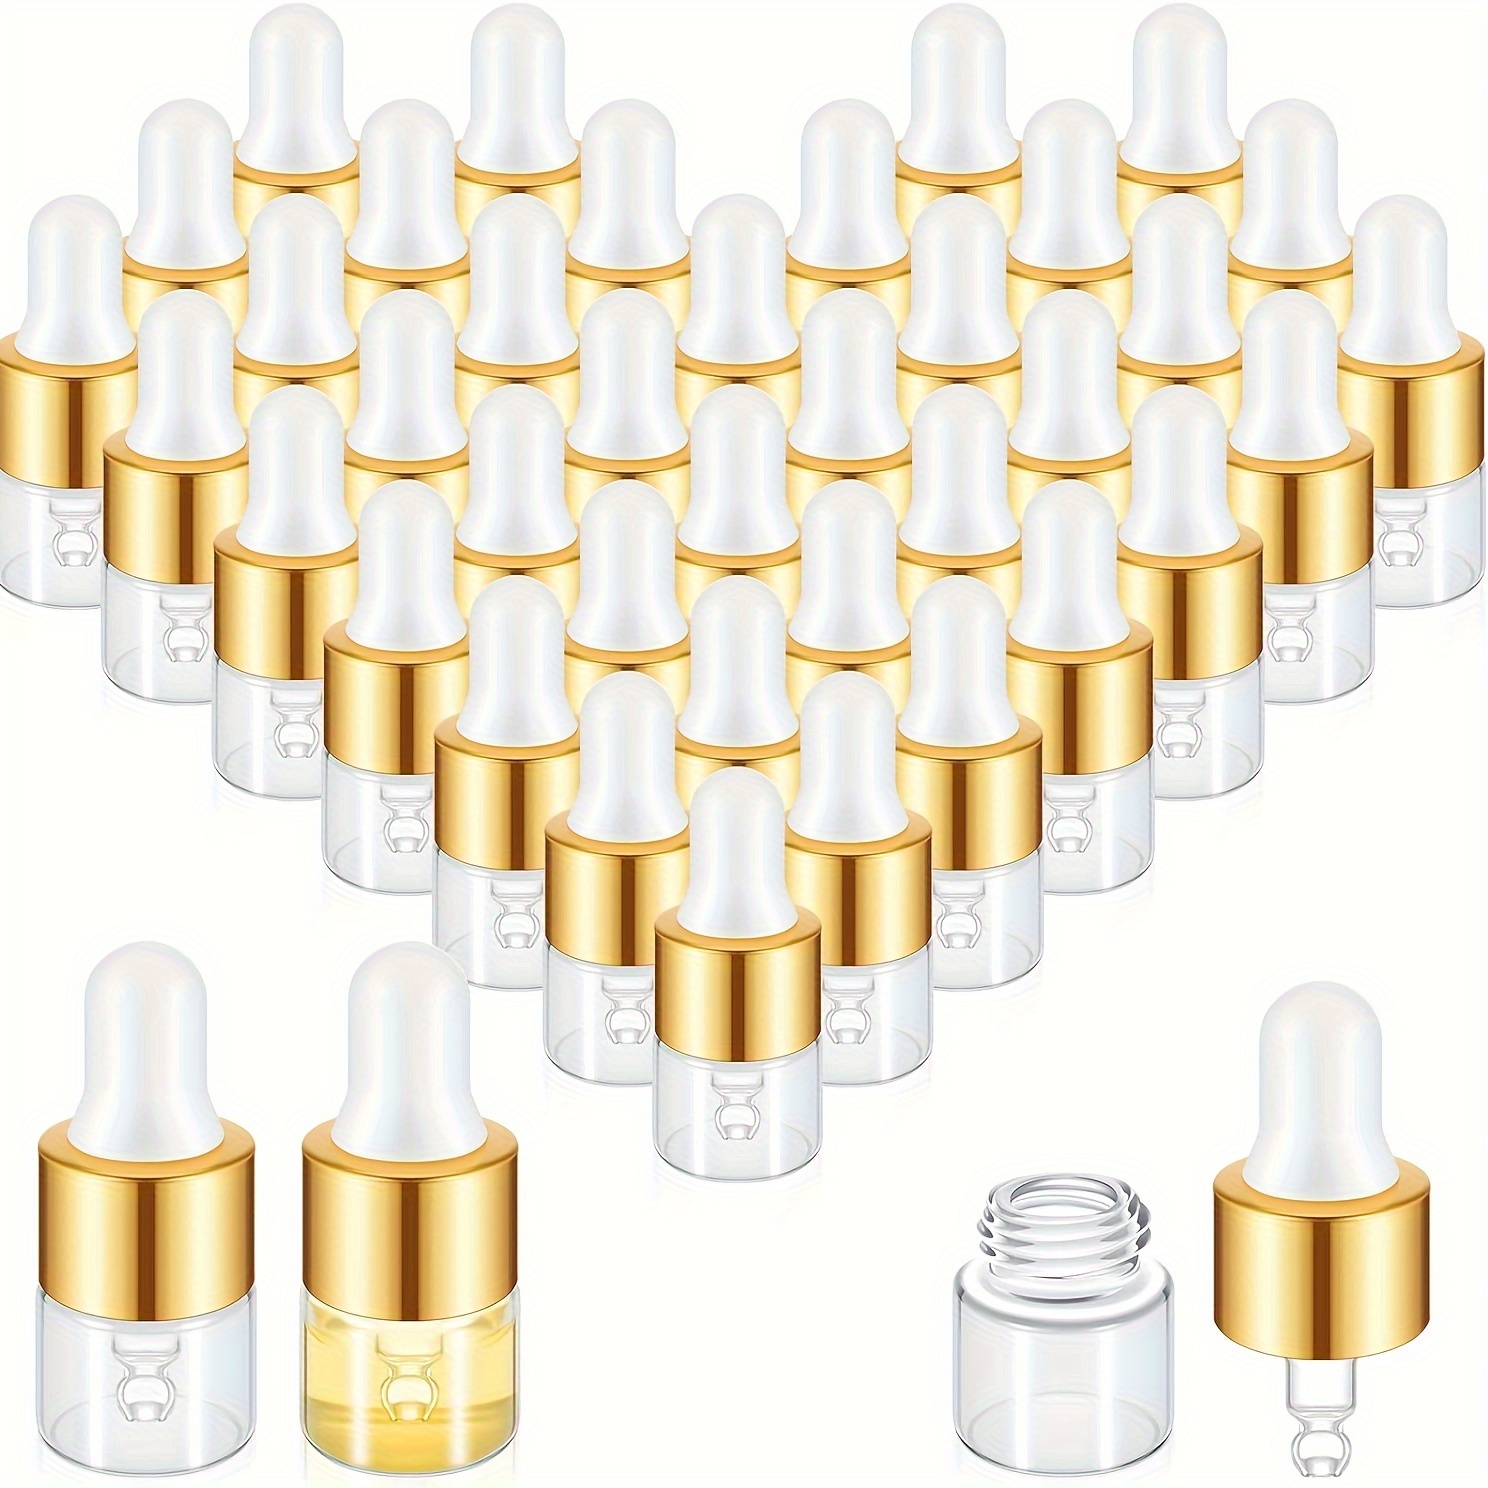 

25-piece Metallic Mini Glass Dropper Bottles - 1/2/3/5ml Sample Containers With Lids For Essential Oils, Fragrances & Cosmetics - Ideal For On-the-go Use